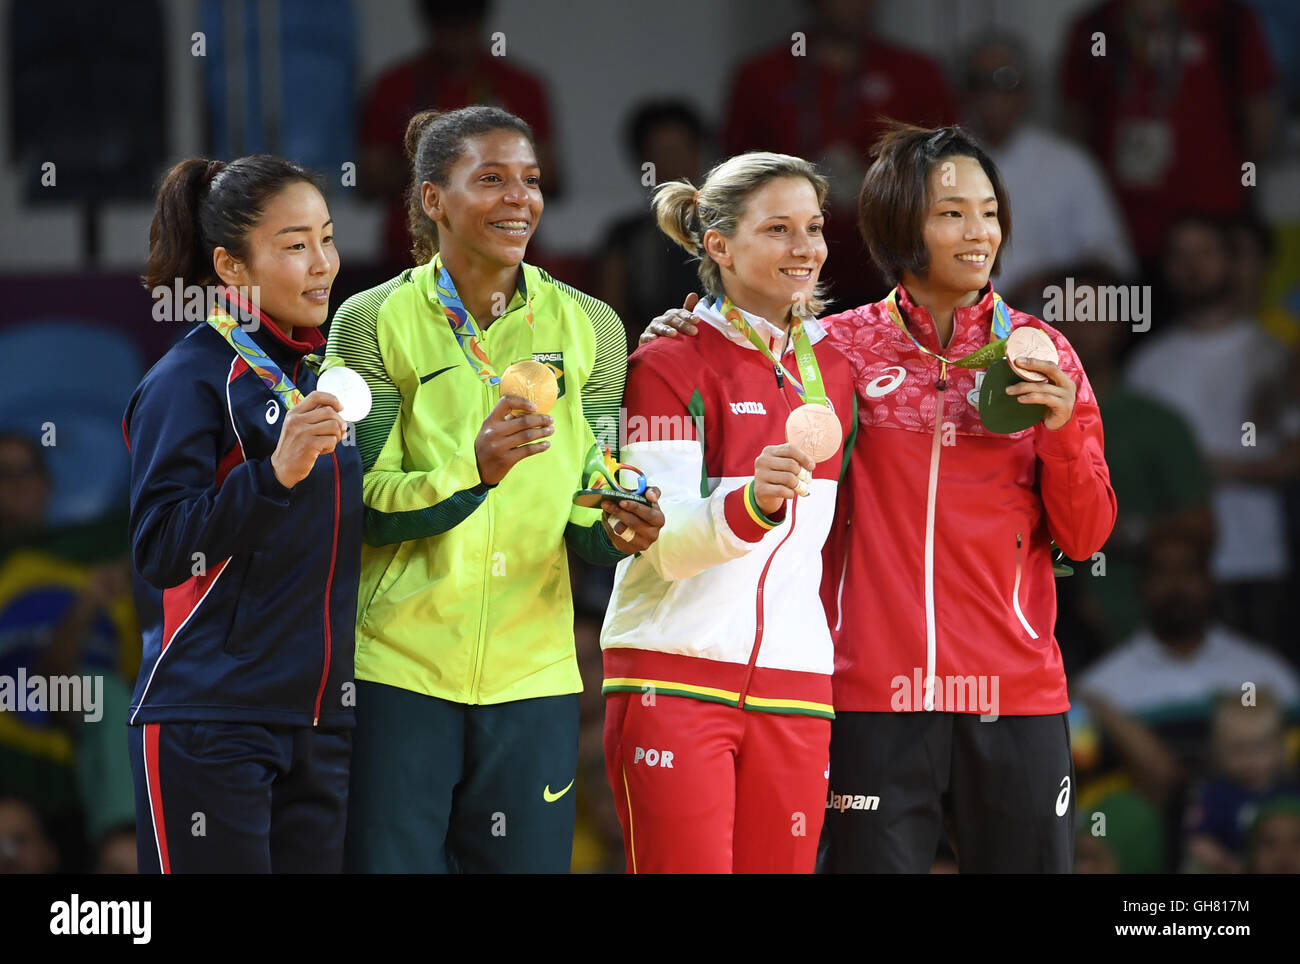 Rio de Janeiro, Brazil. 8th August, 2016. Gold medalist Rafaela Silva (2nd, L) of Brazil, silver medalist Sumiya Dorjsuren of Mongolia (1st, L), bronze medalists Telma Monteiro of Portugal (2nd, R) and Kaori Matsumoto of Japan pose for photos during the awarding ceremony of women's -57kg judo final at the 2016 Rio Olympic Games in Rio de Janeiro, Brazil, on Aug. 8, 2016.?Xinhua/Wu Wei?(xr) Credit:  Xinhua/Alamy Live News Stock Photo